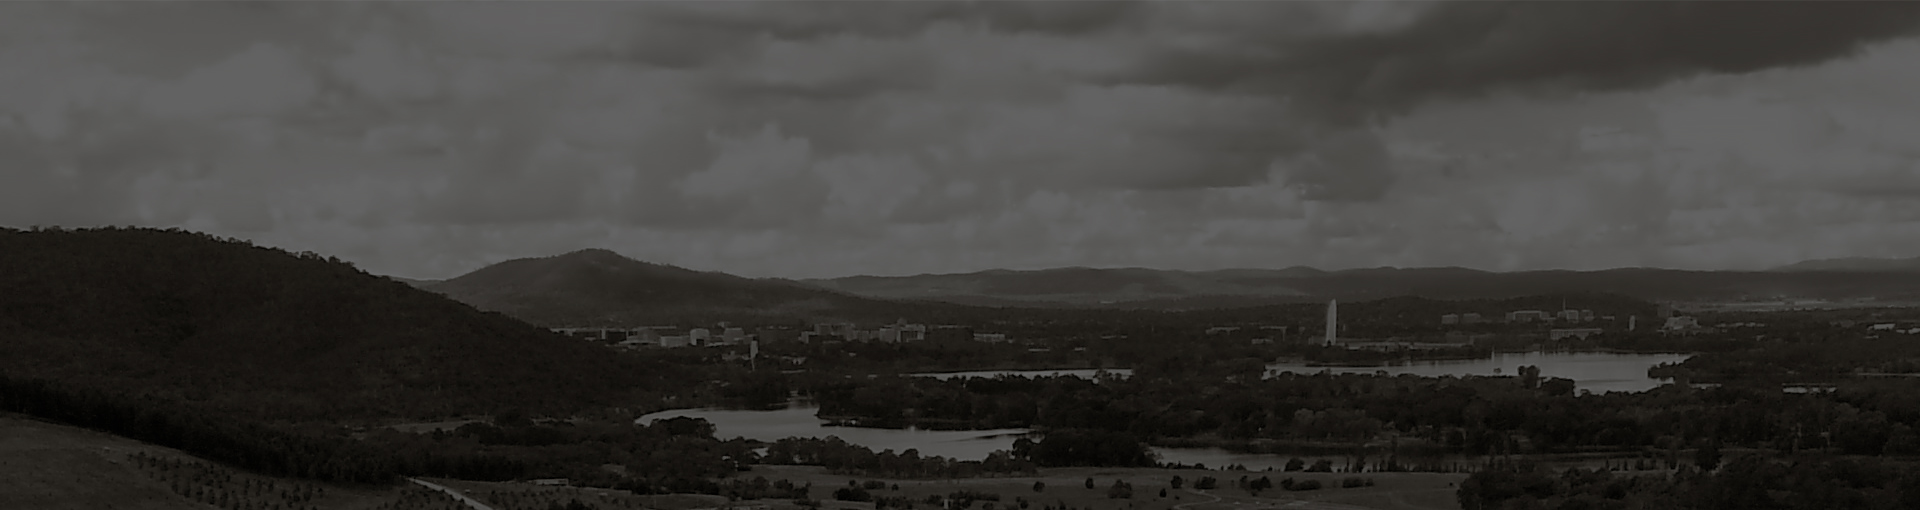 Canberra Highlands in Grayscale